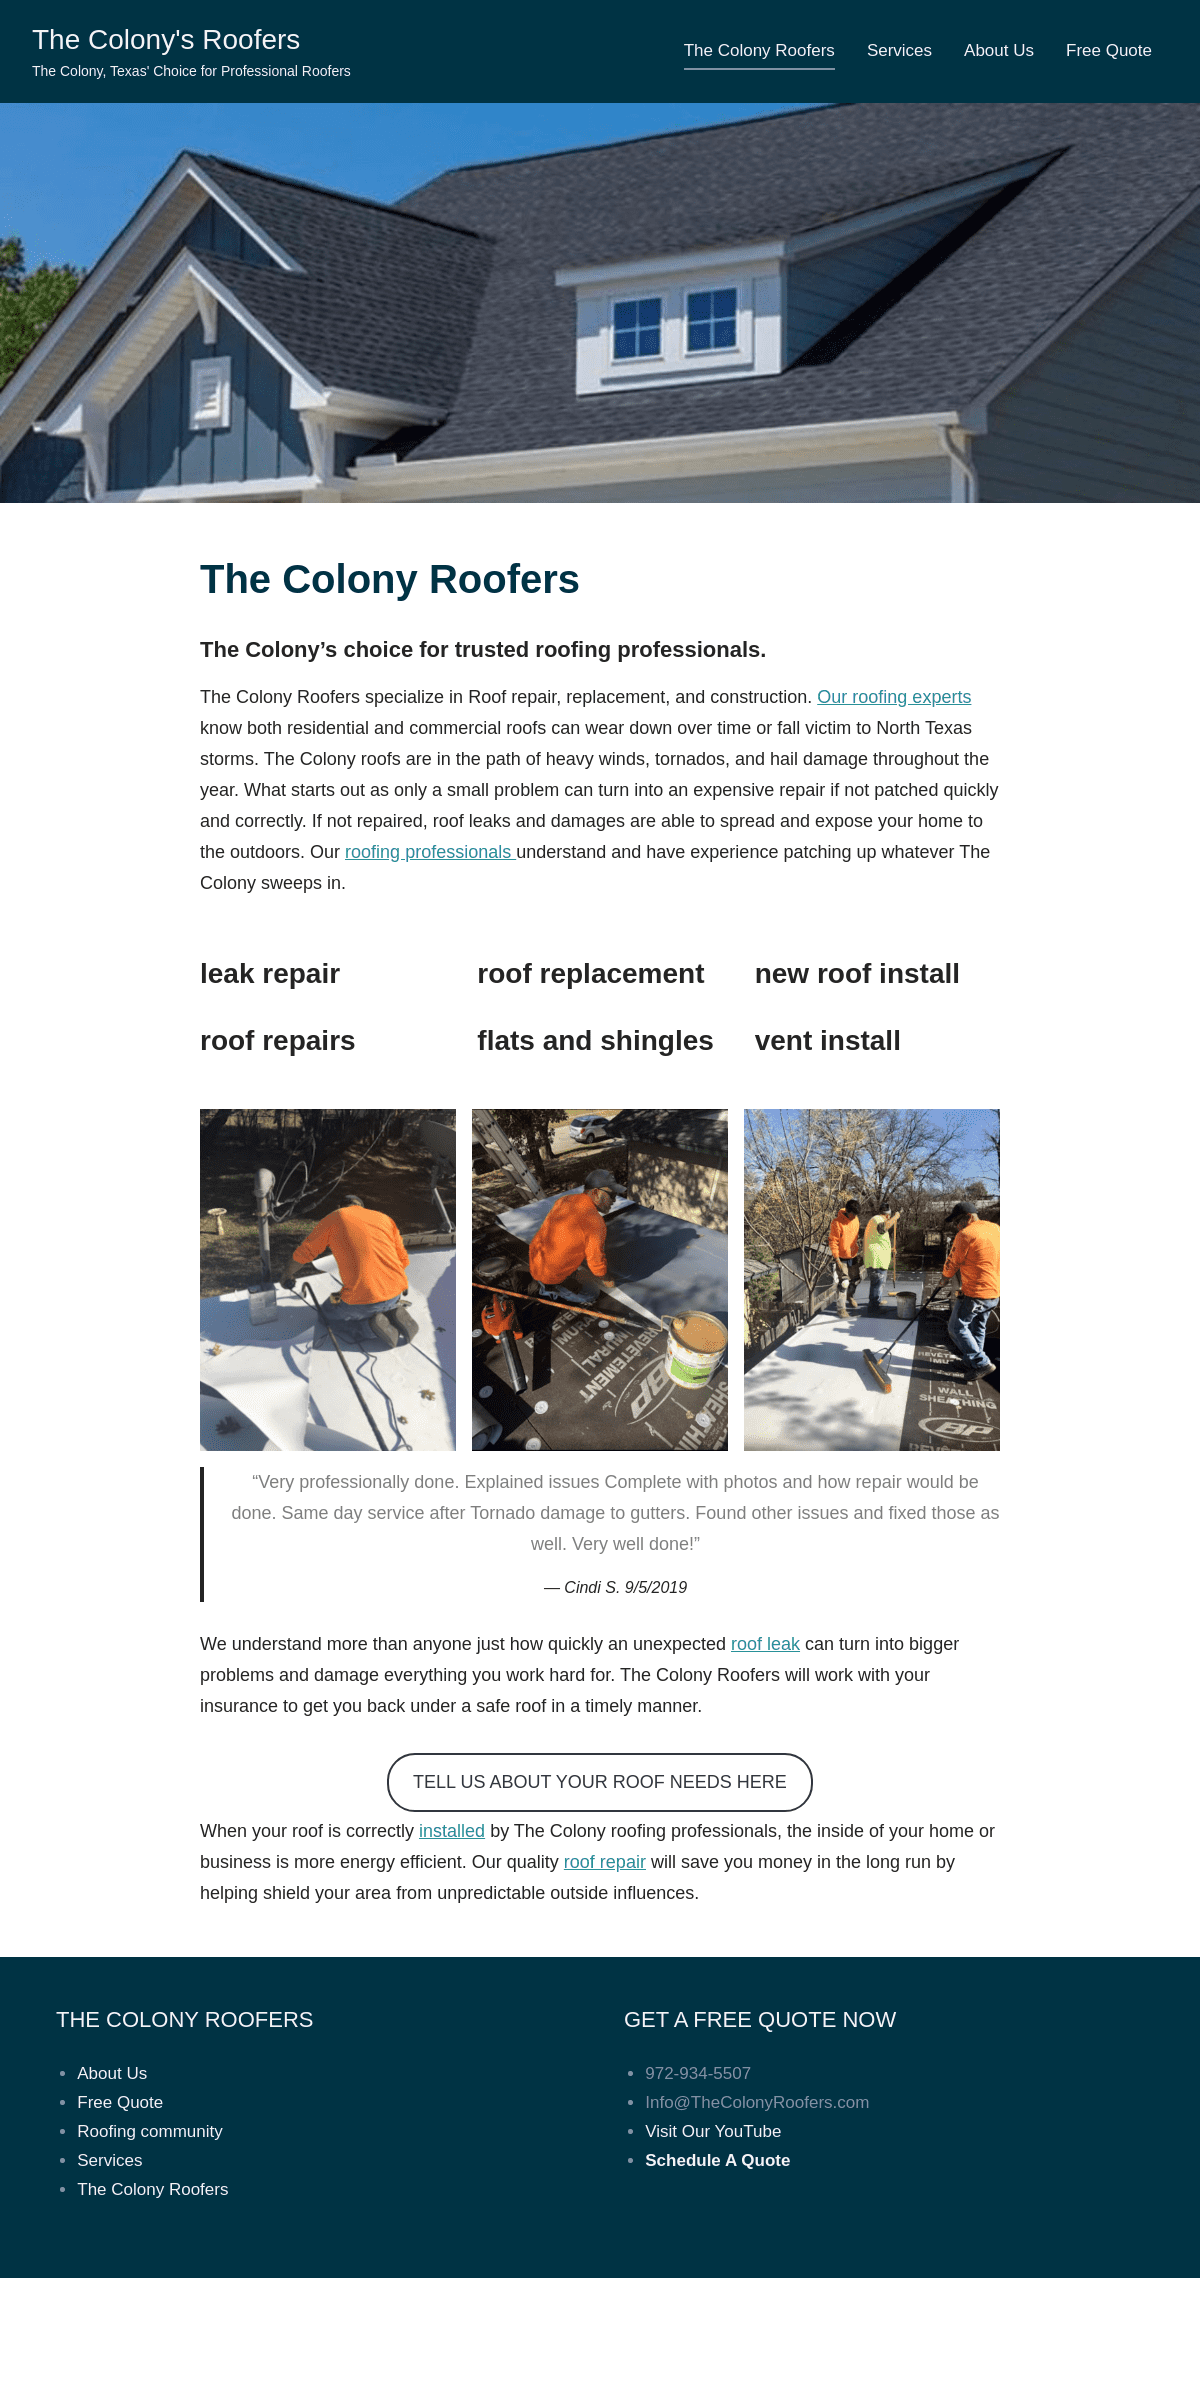 A complete backup of thecolonyroofers.com